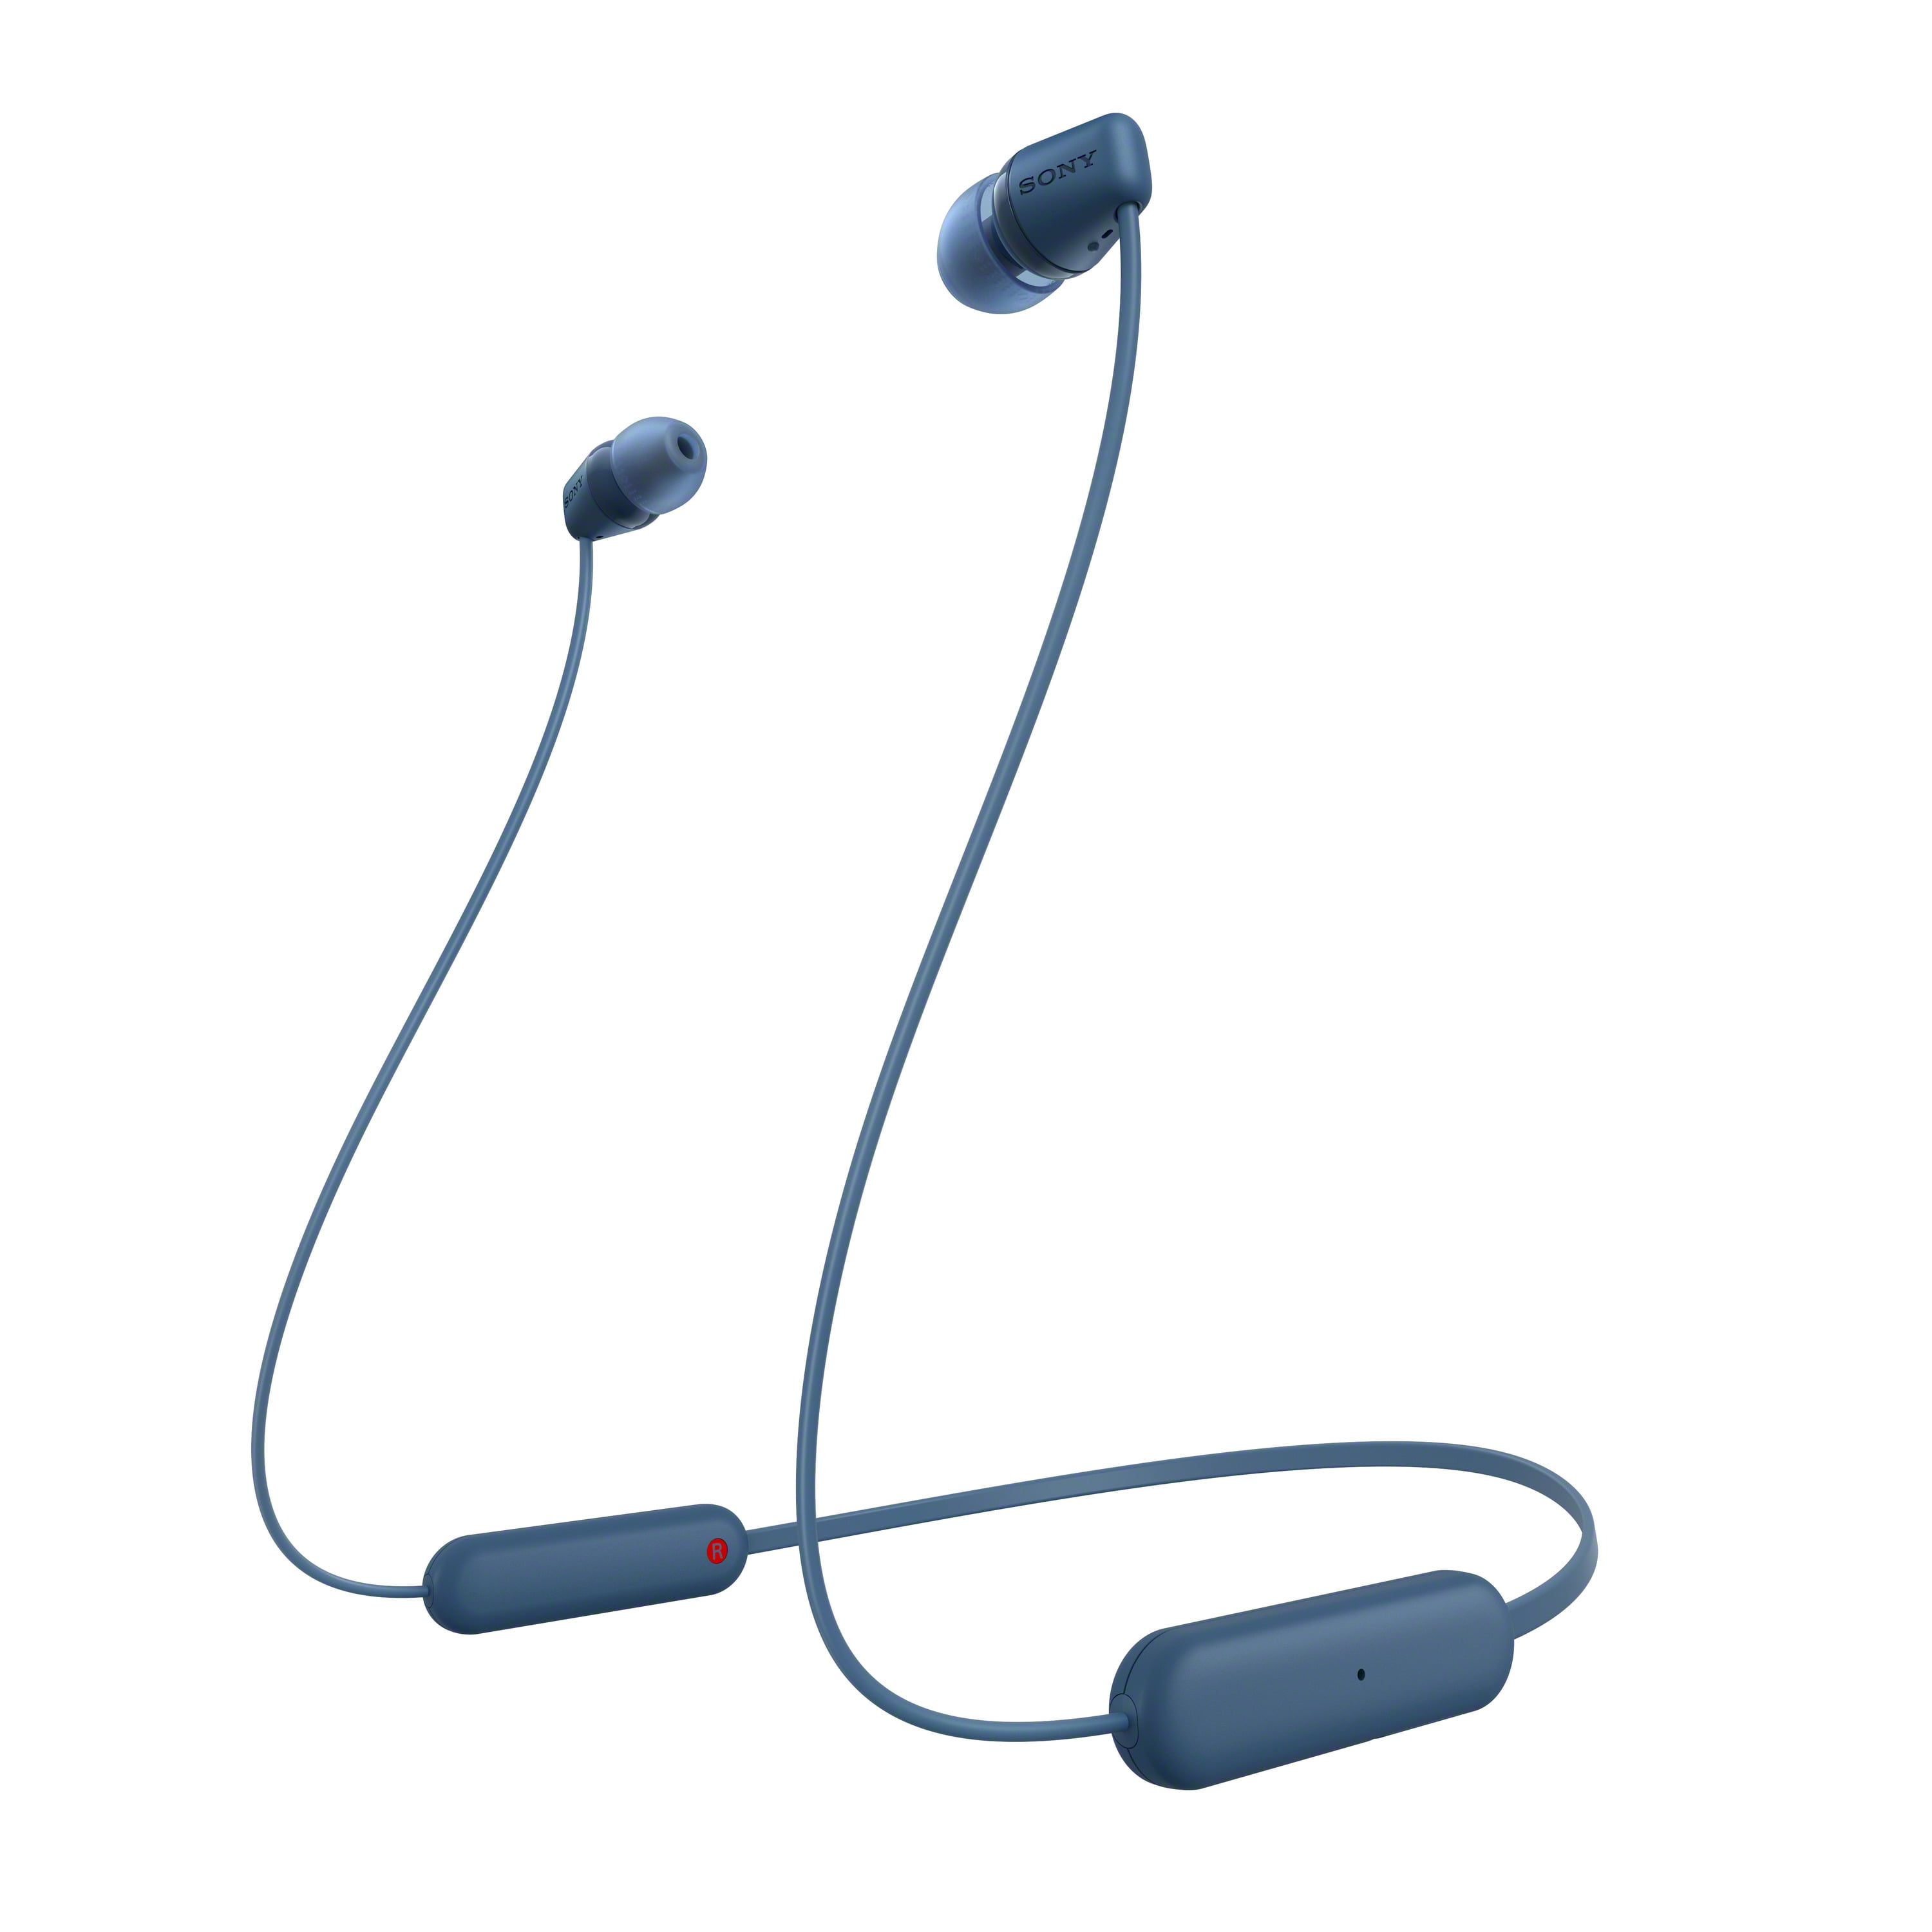 Sony crams world-class ANC into more compact wireless earphones